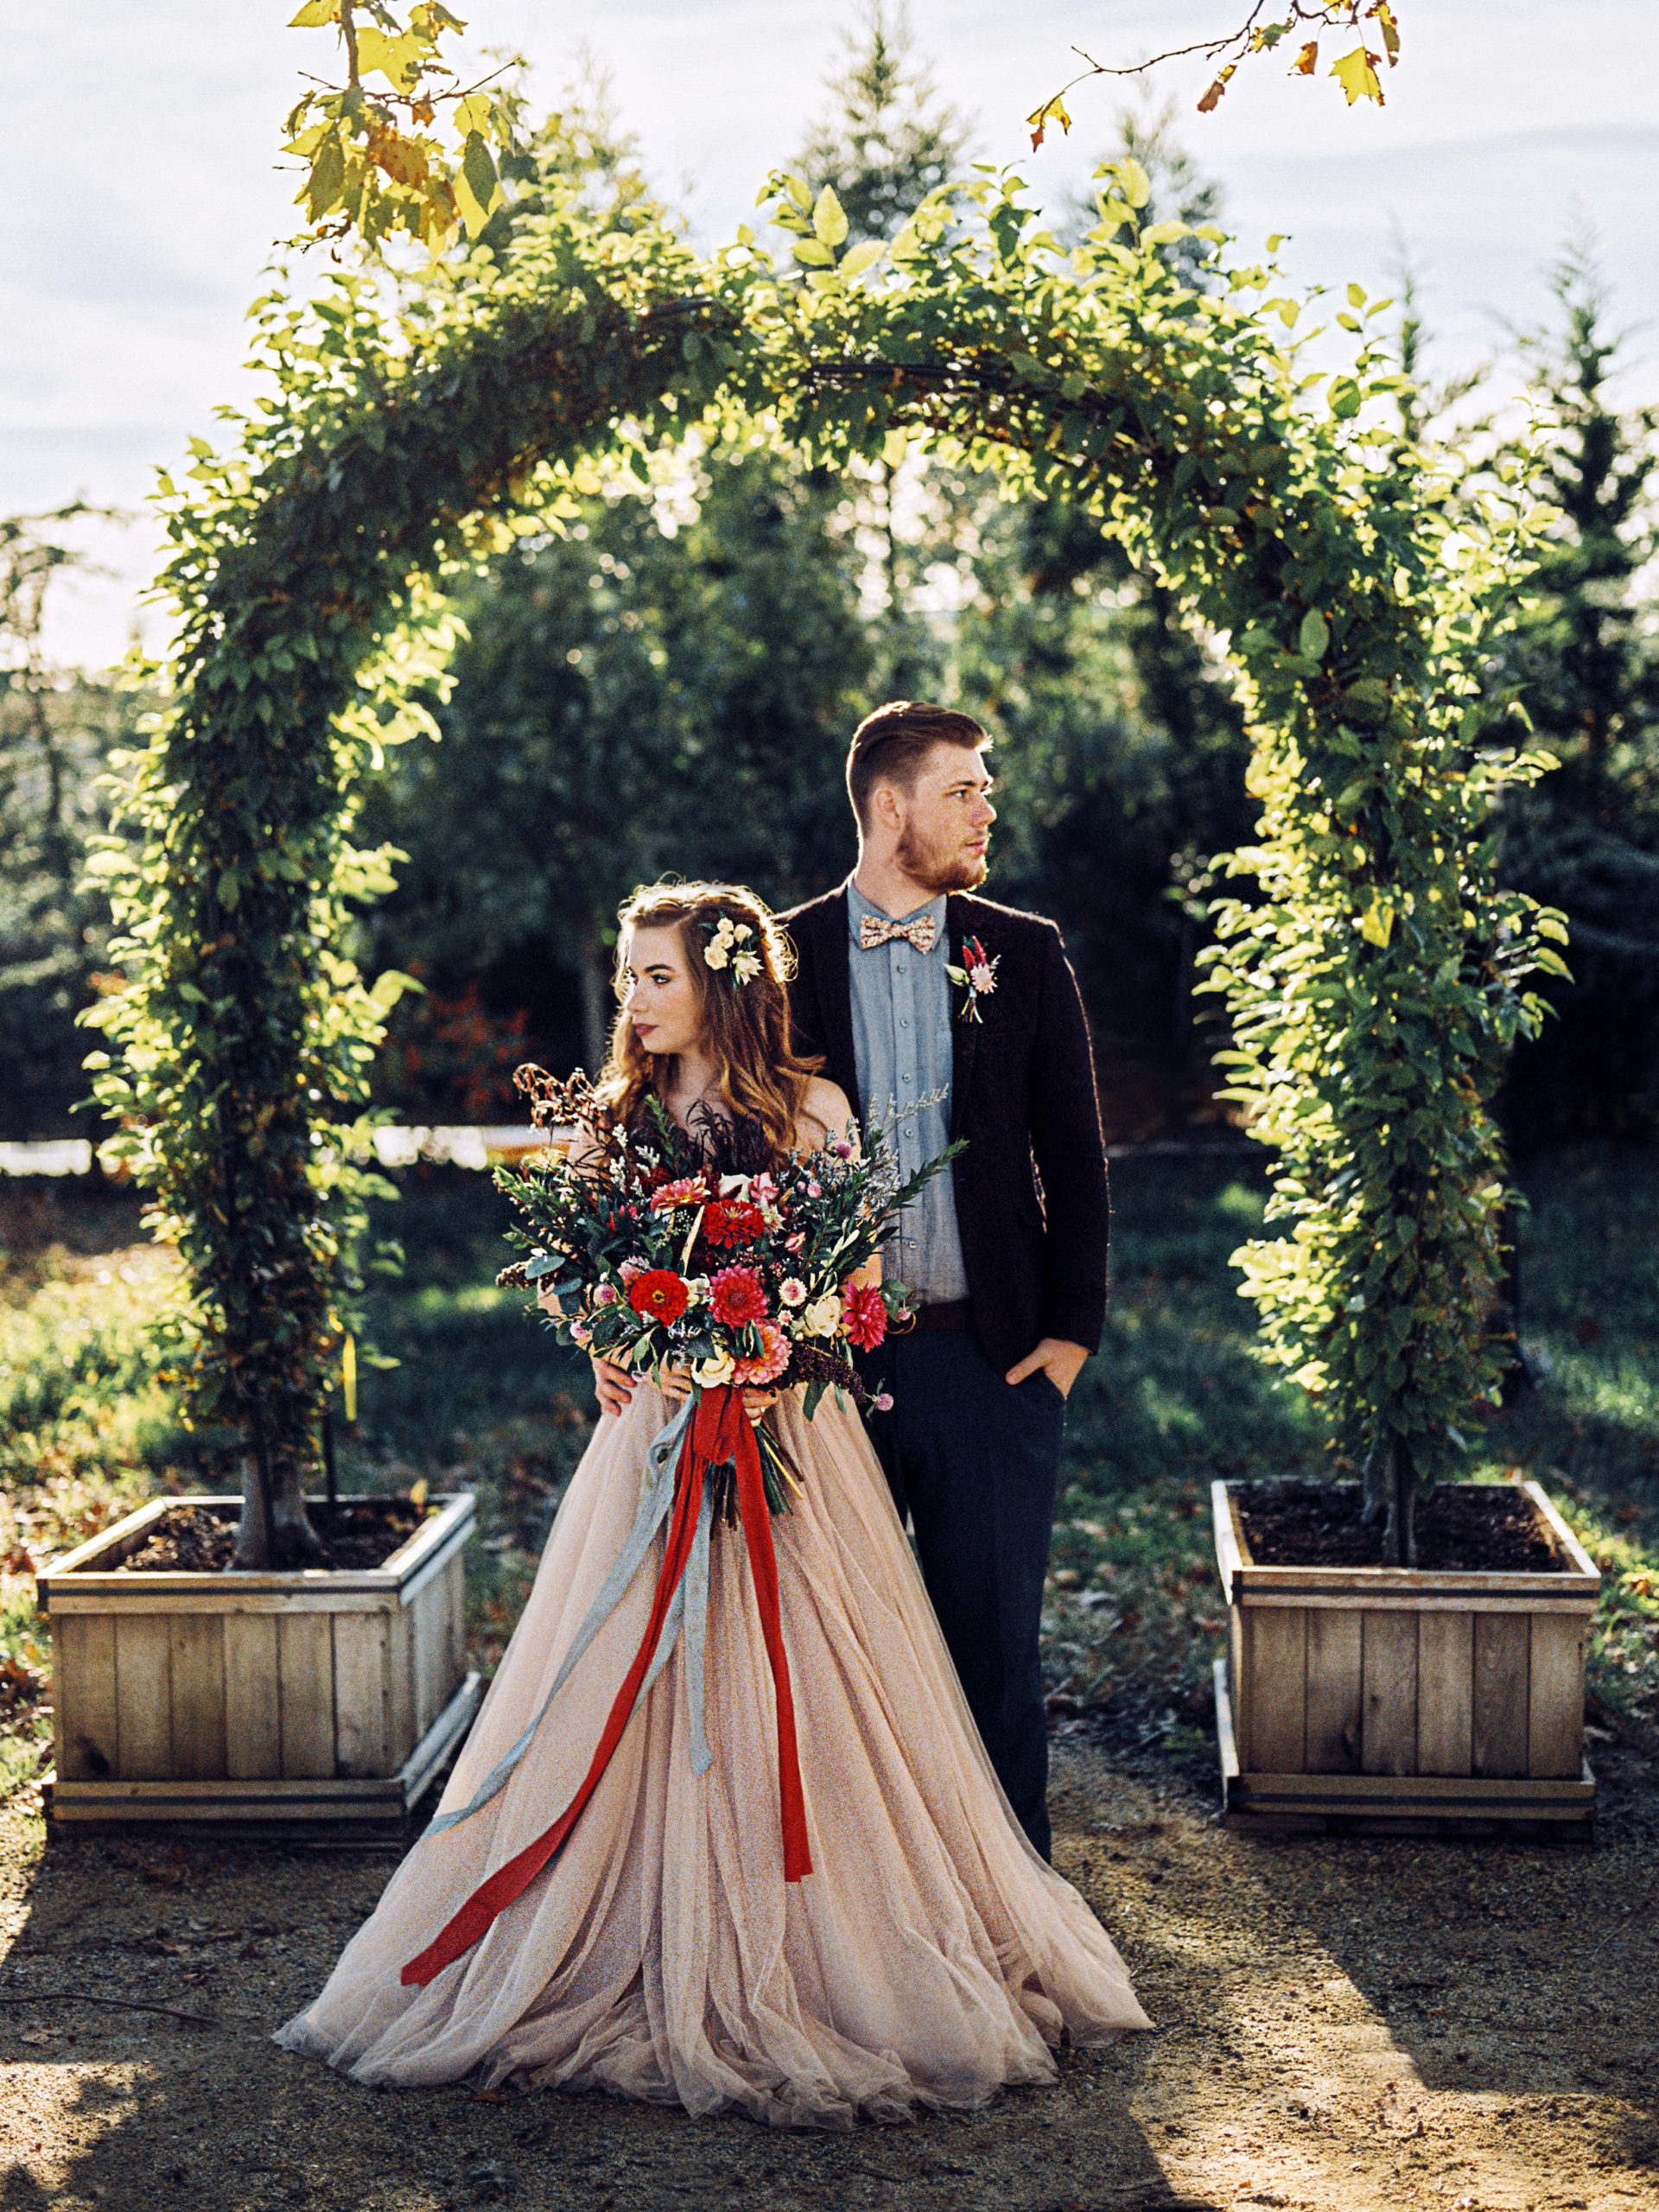 Terrain at Styers Elopement Micro-Wedding by Jessica Manns Photography